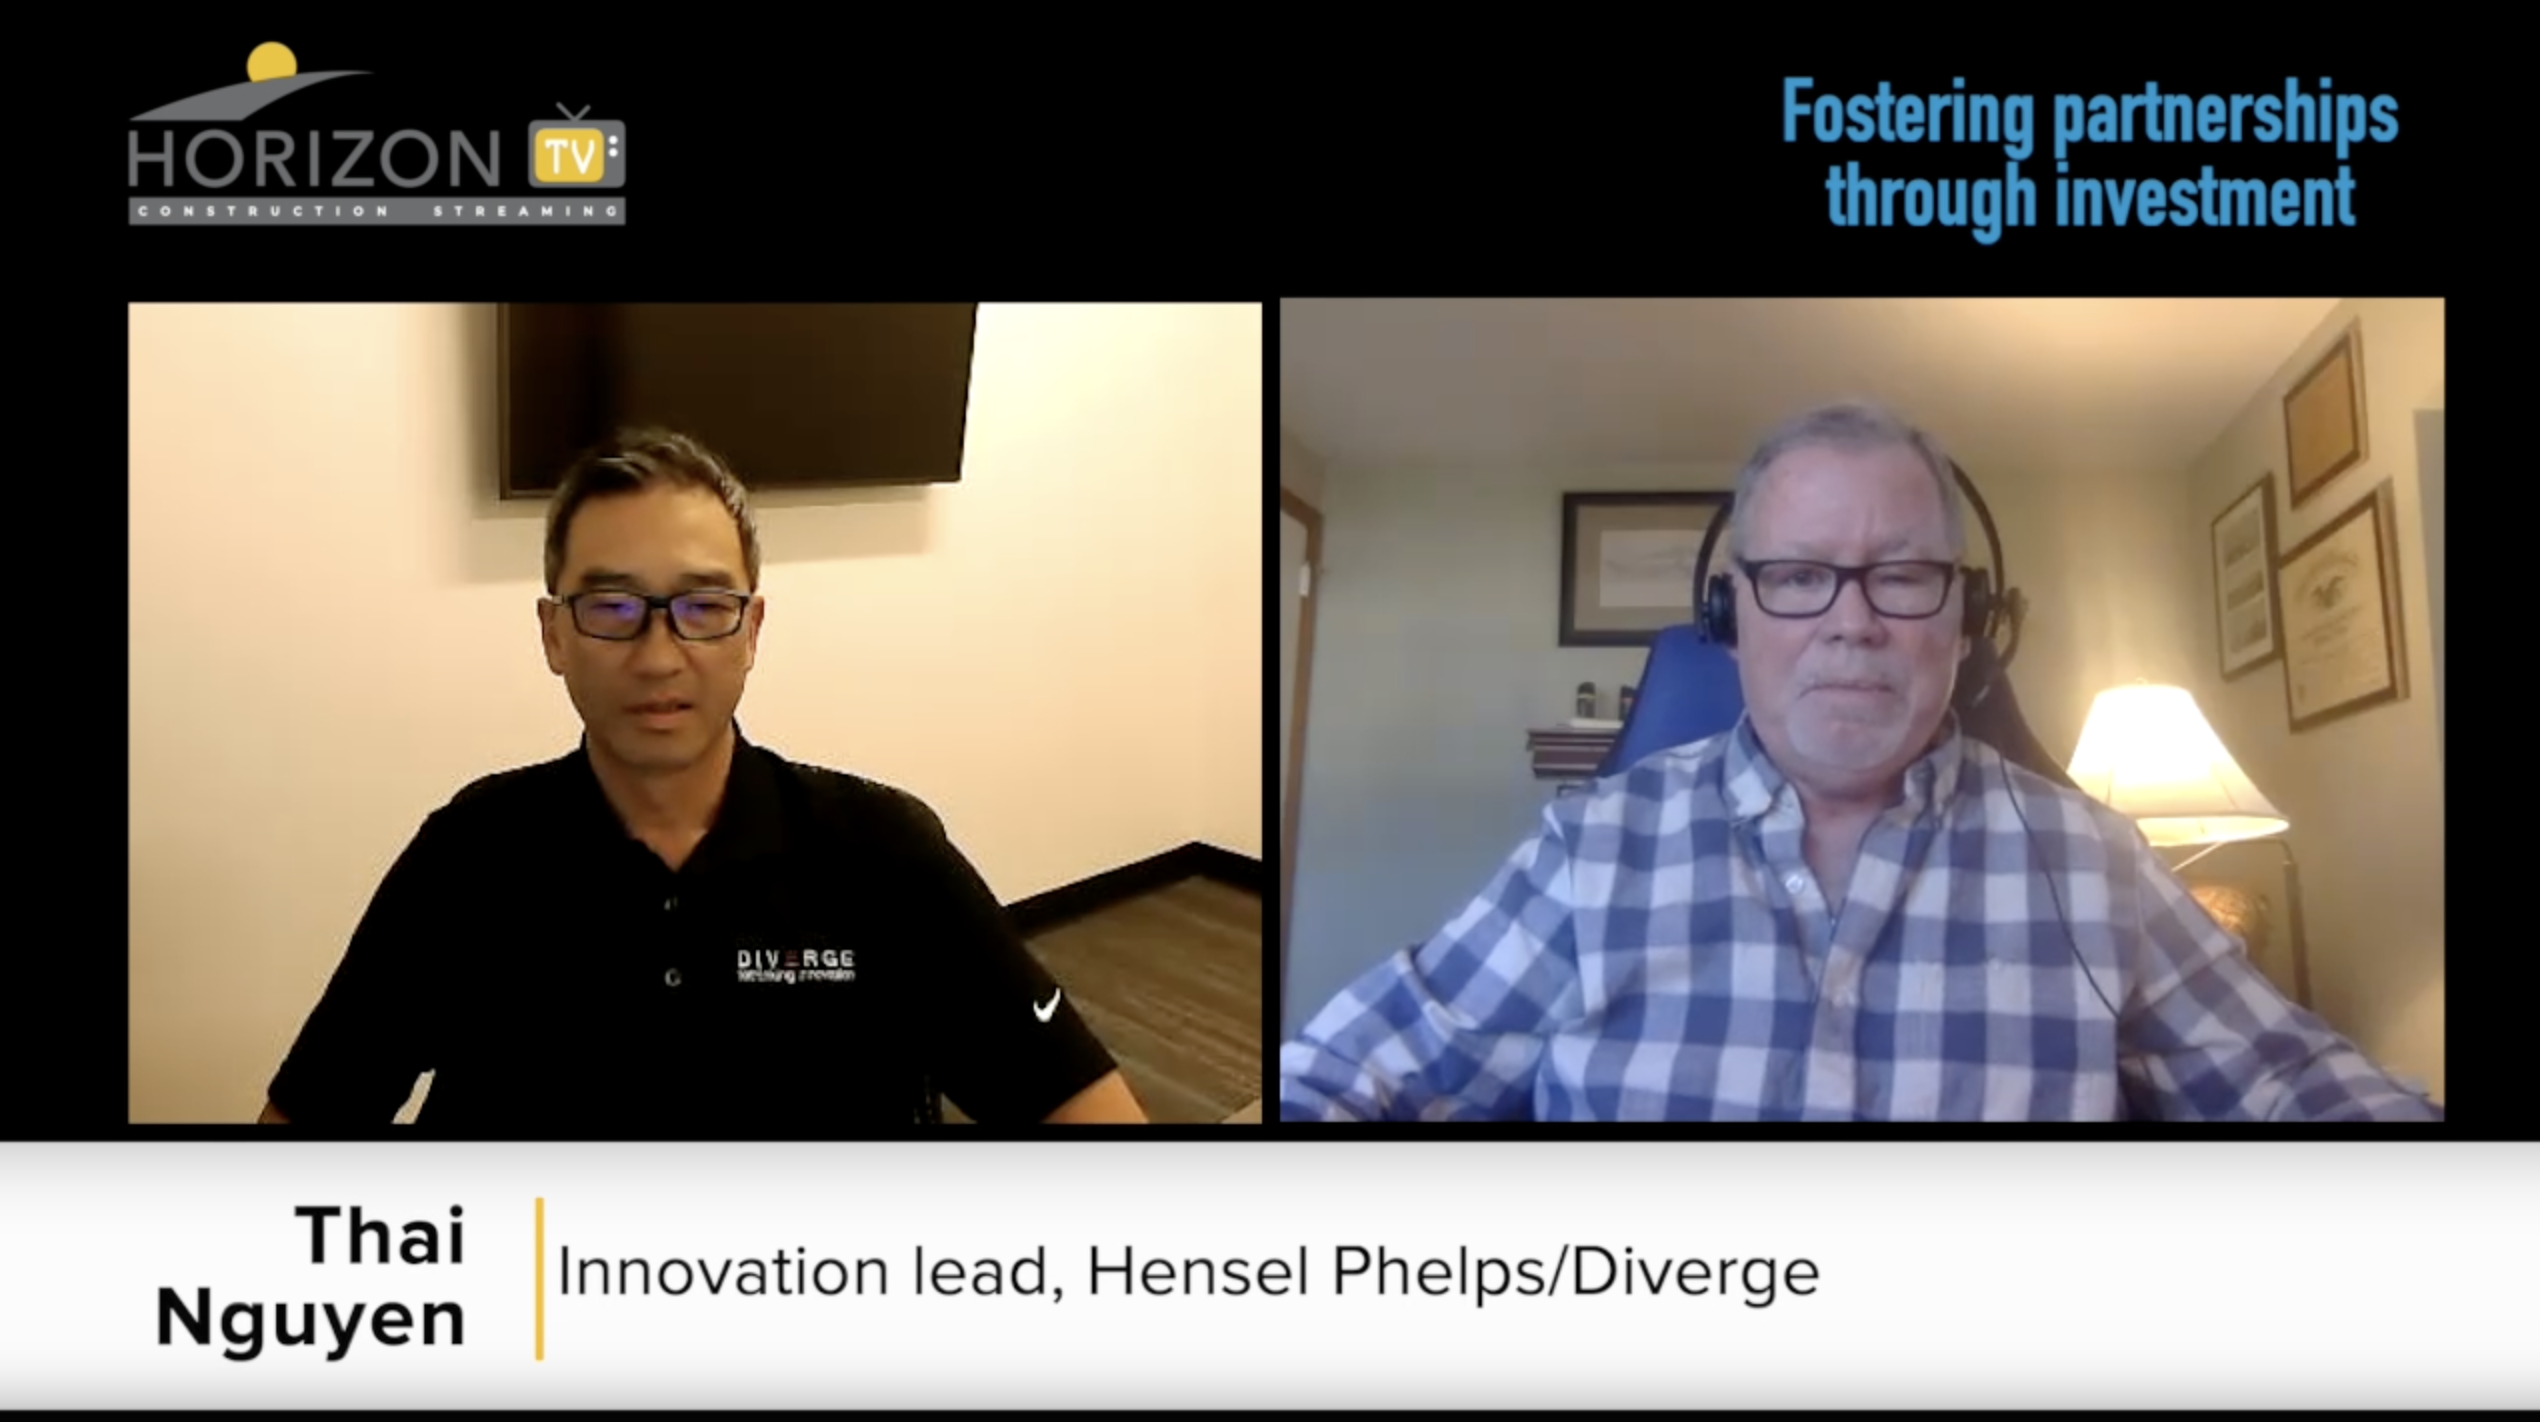 Meet Diverge, Hensel Phelps' new ConTech investment company